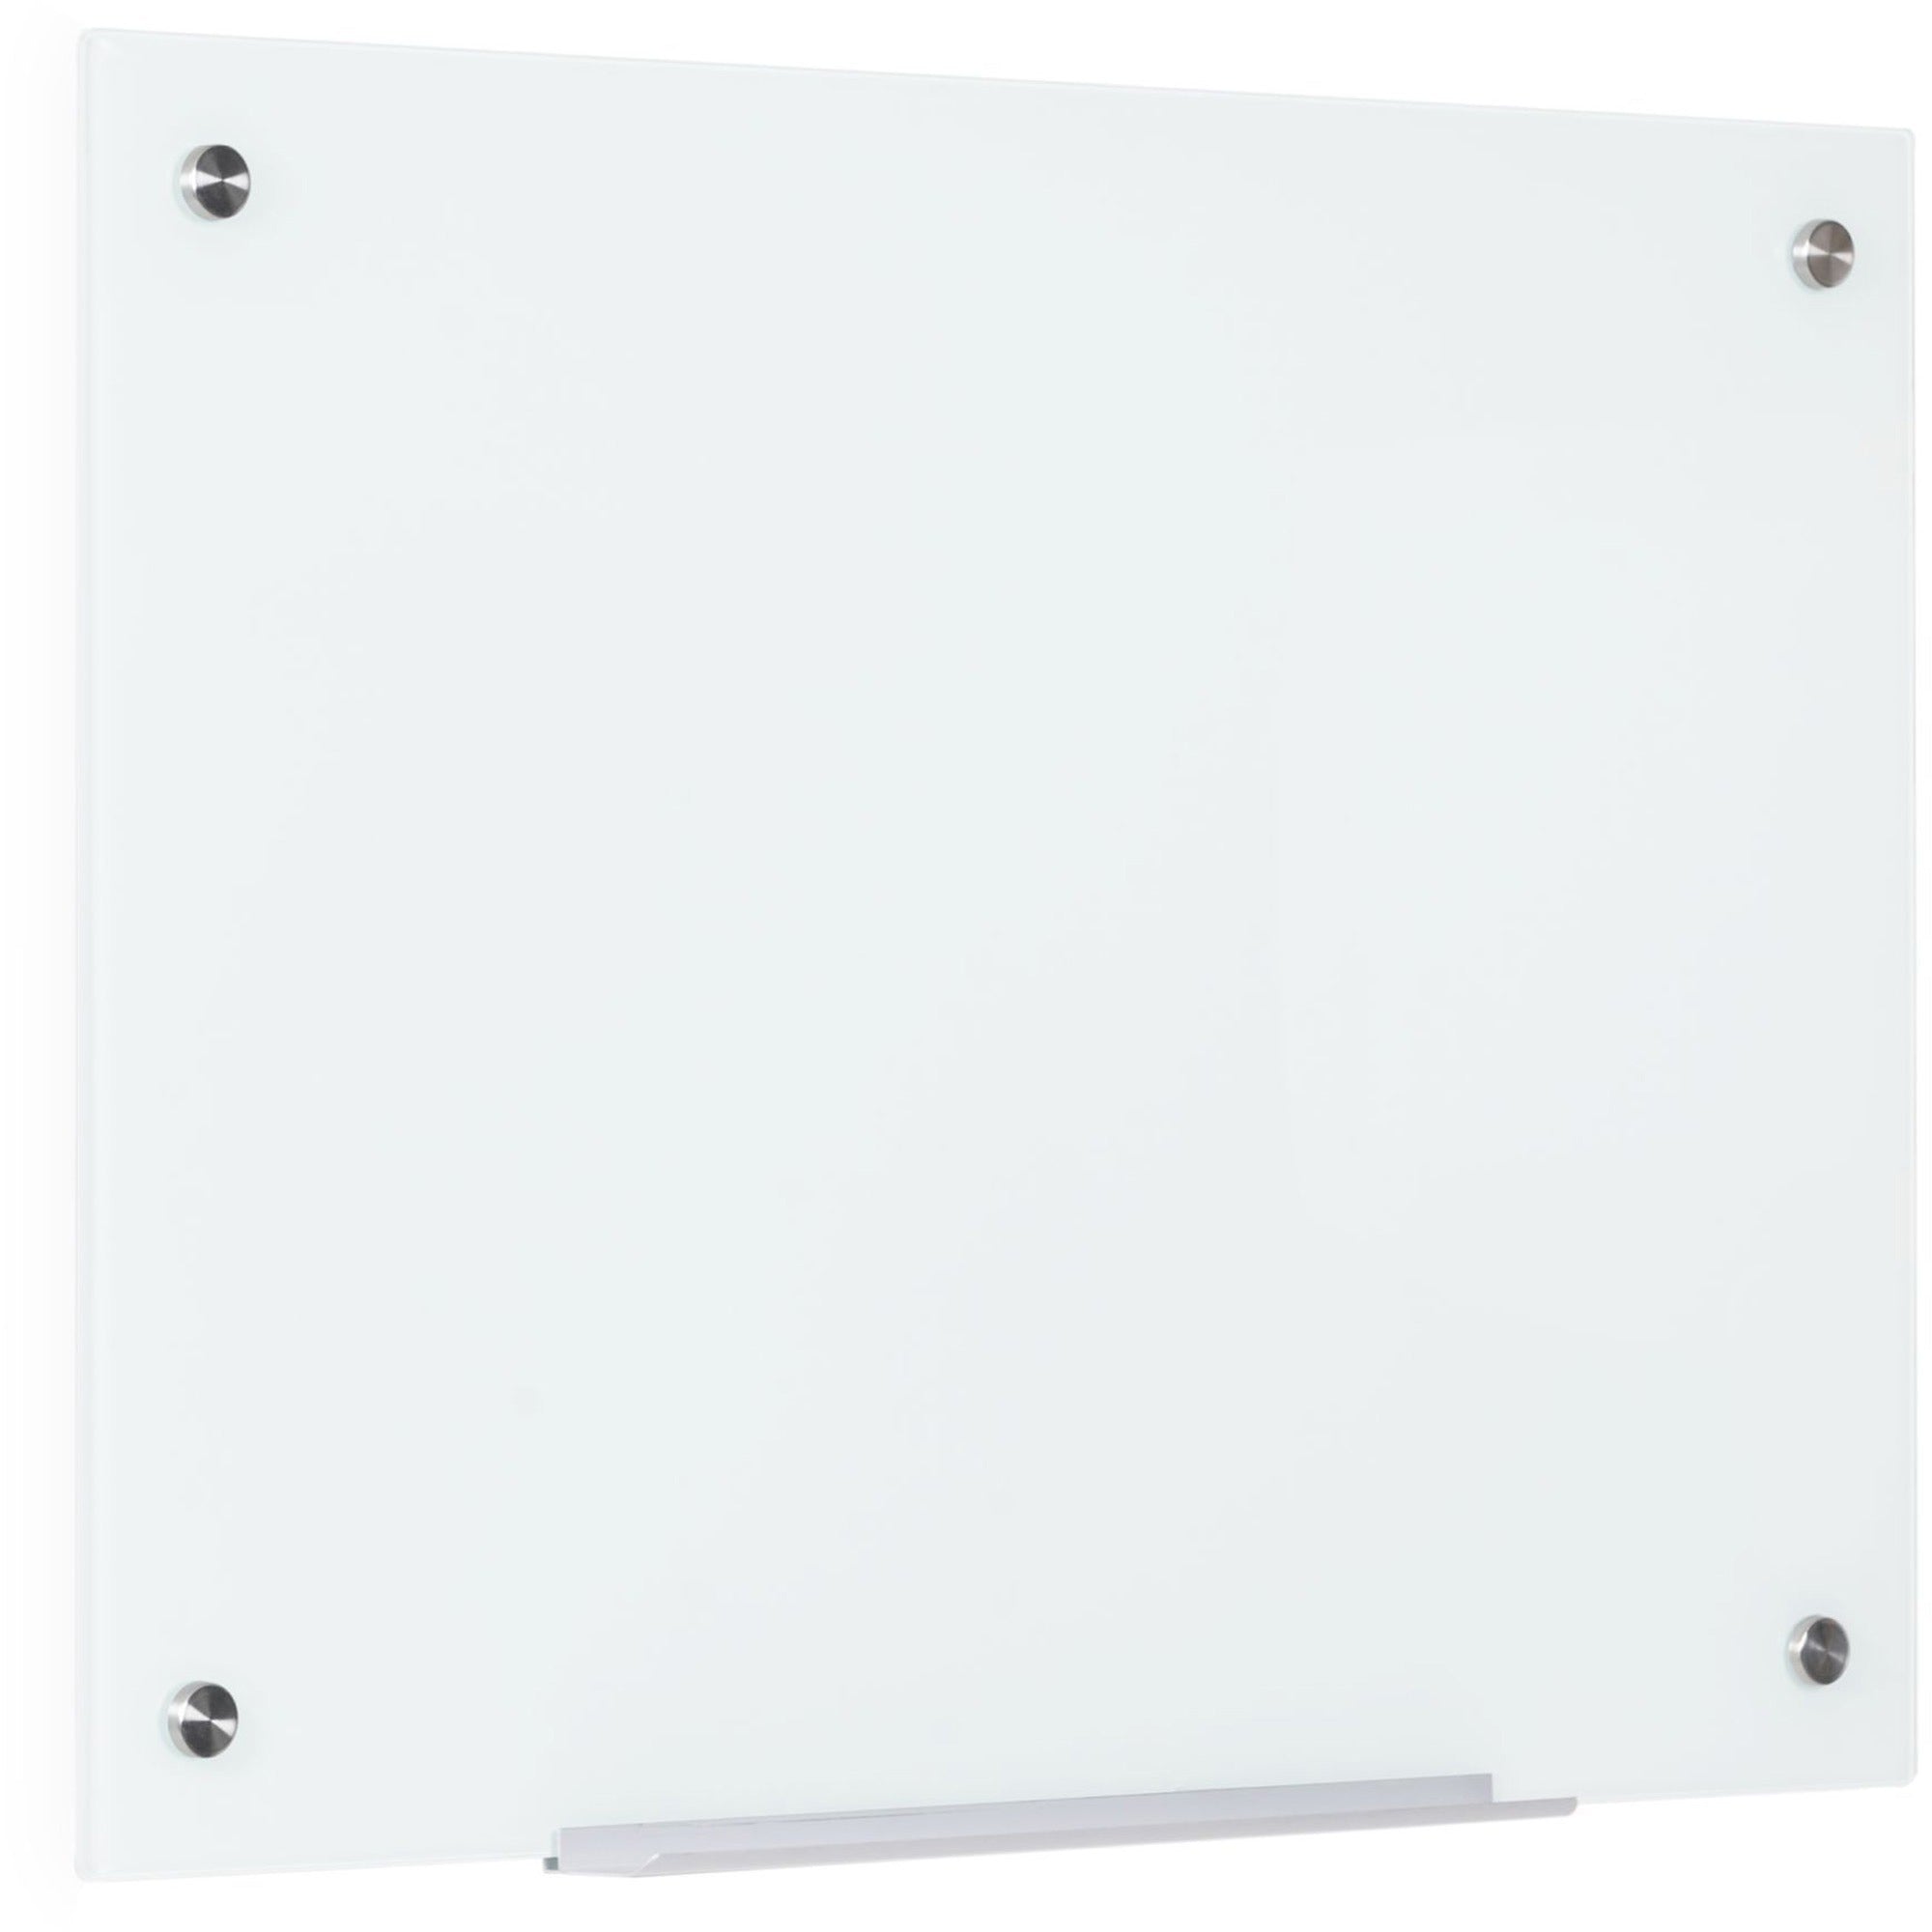 bi-silque-magnetic-glass-dry-erase-board-18-15-ft-width-x-24-2-ft-height-white-glass-surface-rectangle-horizontal-vertical-magnetic-1-each_bvcgl040107 - 3